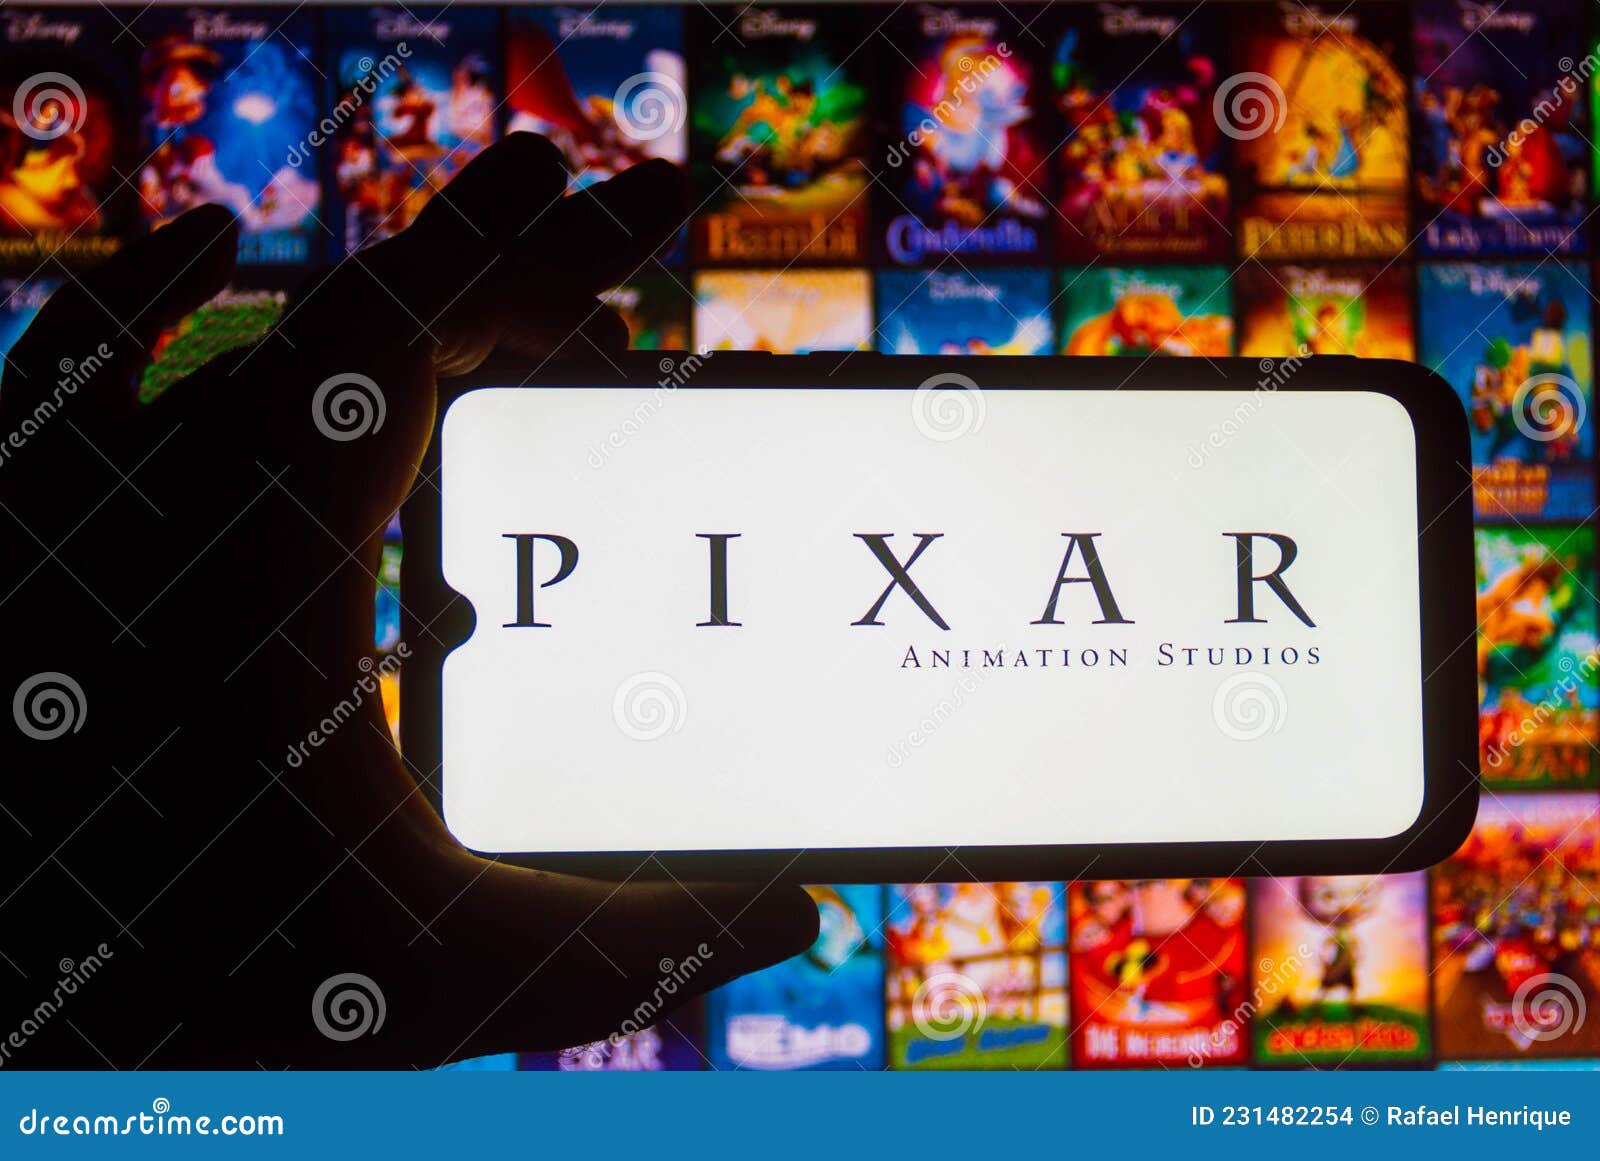 October 7, 2021, Brazil. in this Photo Illustration the Pixar Animation  Studios Logo Seen Displayed on a Smartphone Editorial Stock Image - Image  of logo, online: 231482254